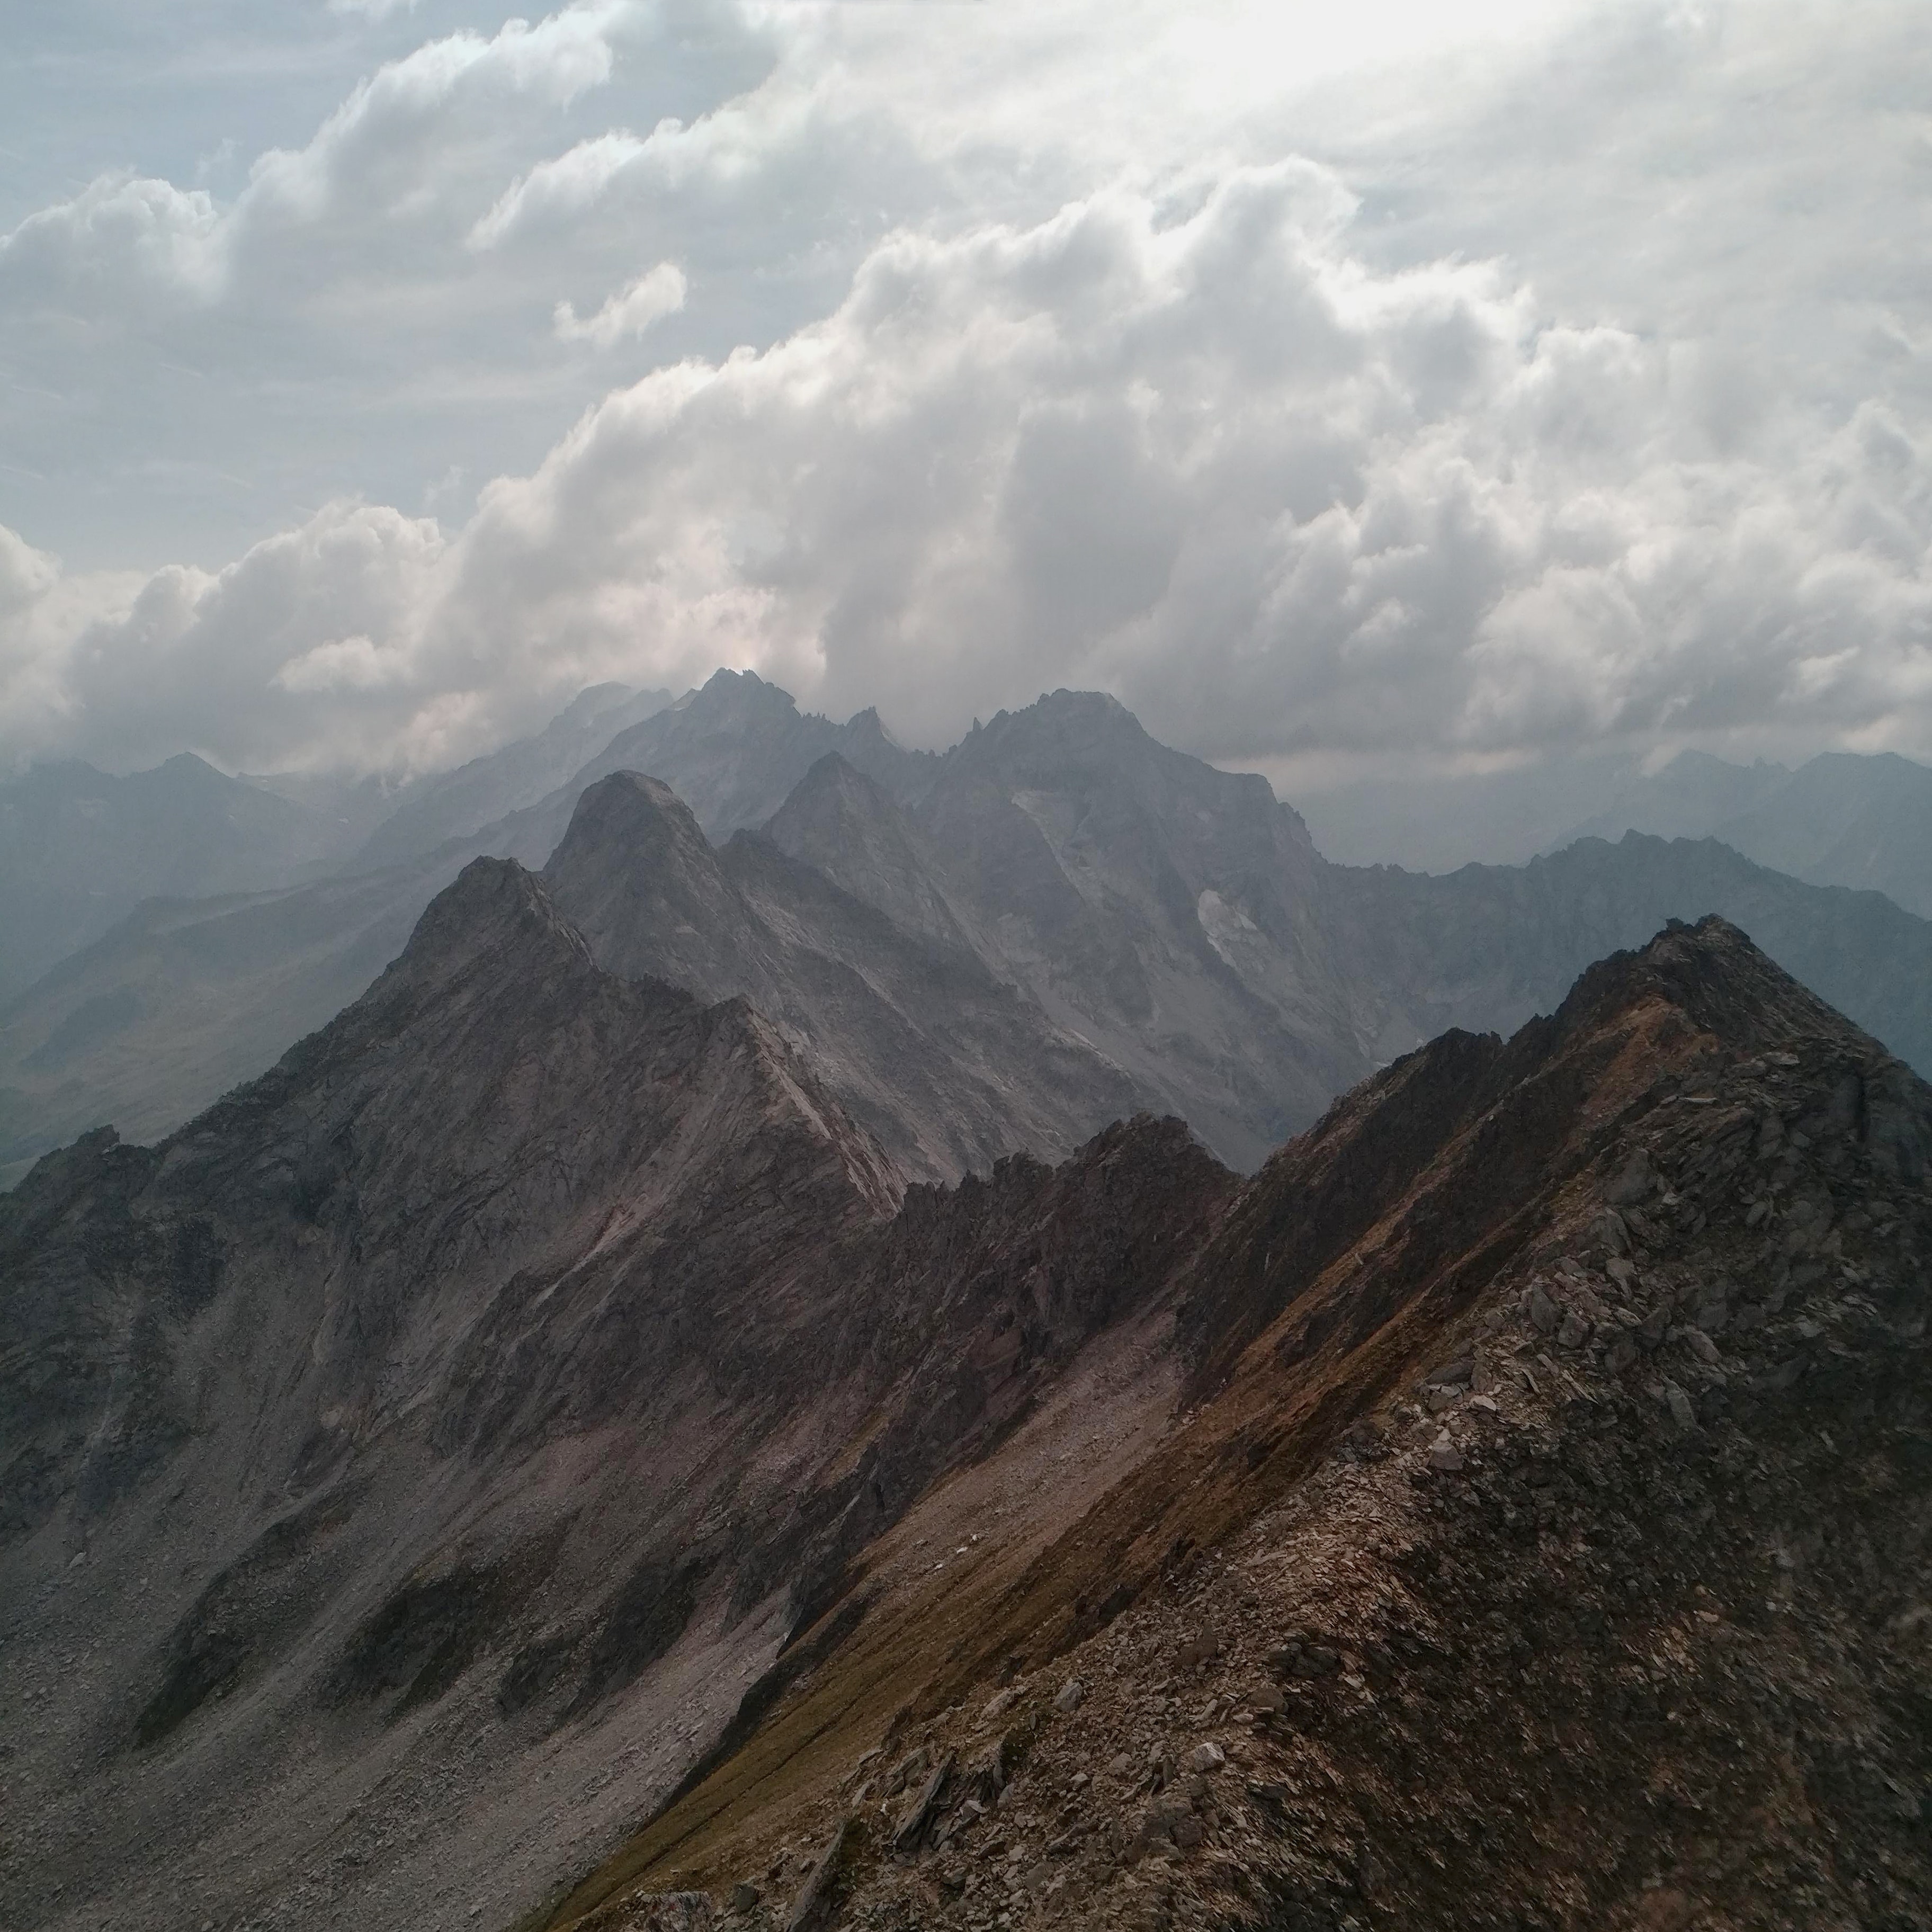 Brown and gray mountains under a cloudy sky